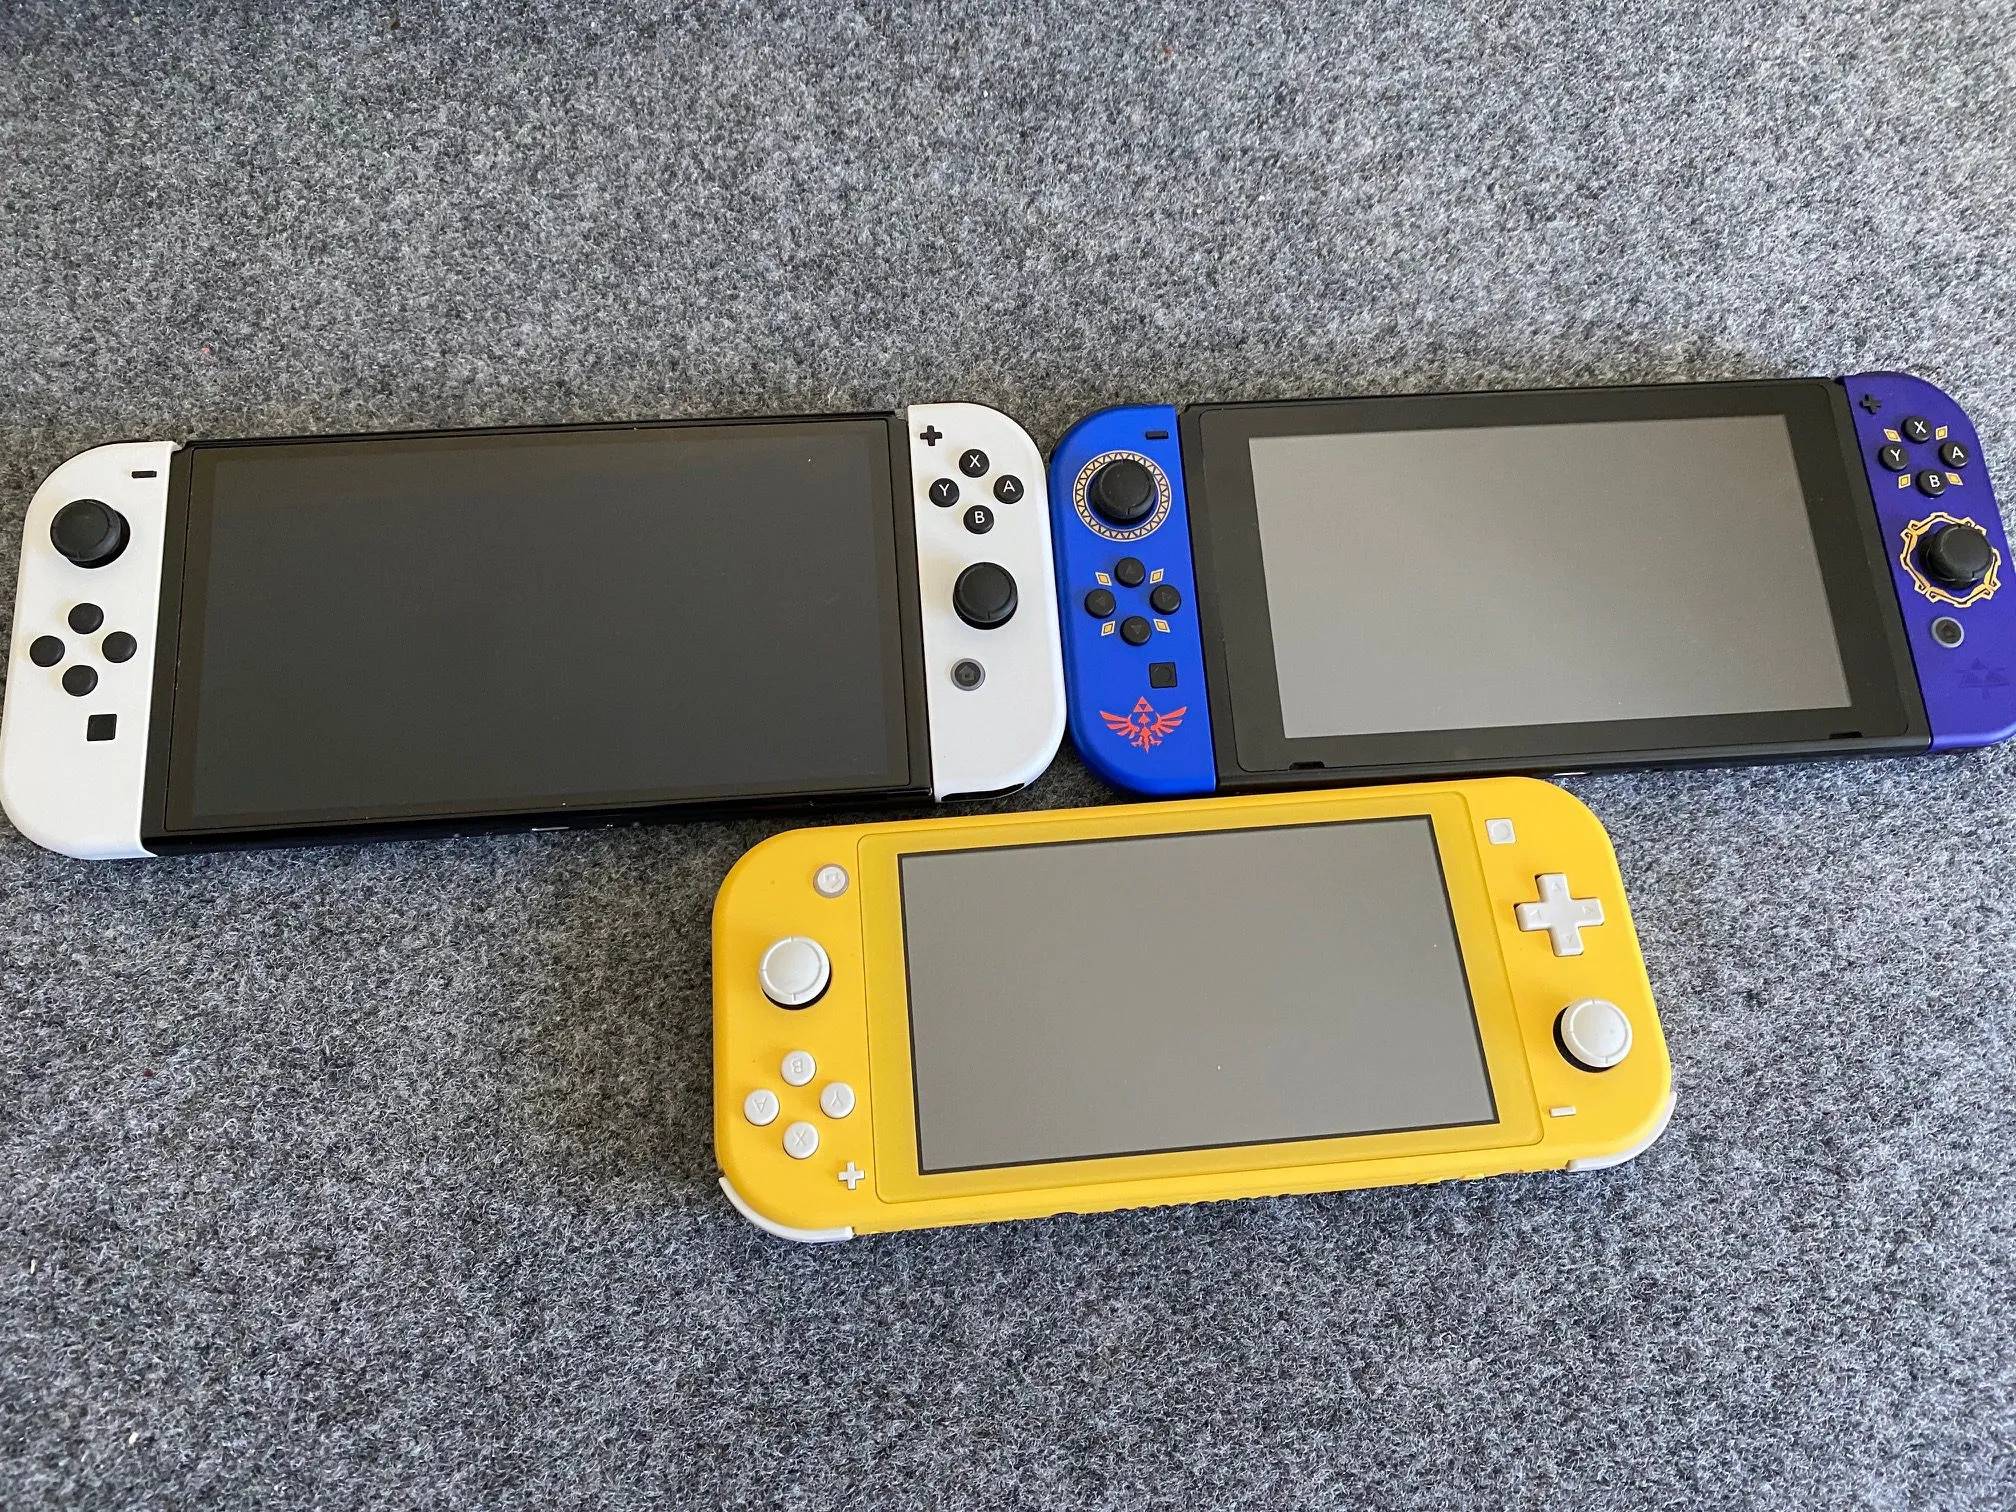 Nintendo Switch vs Switch OLED console review